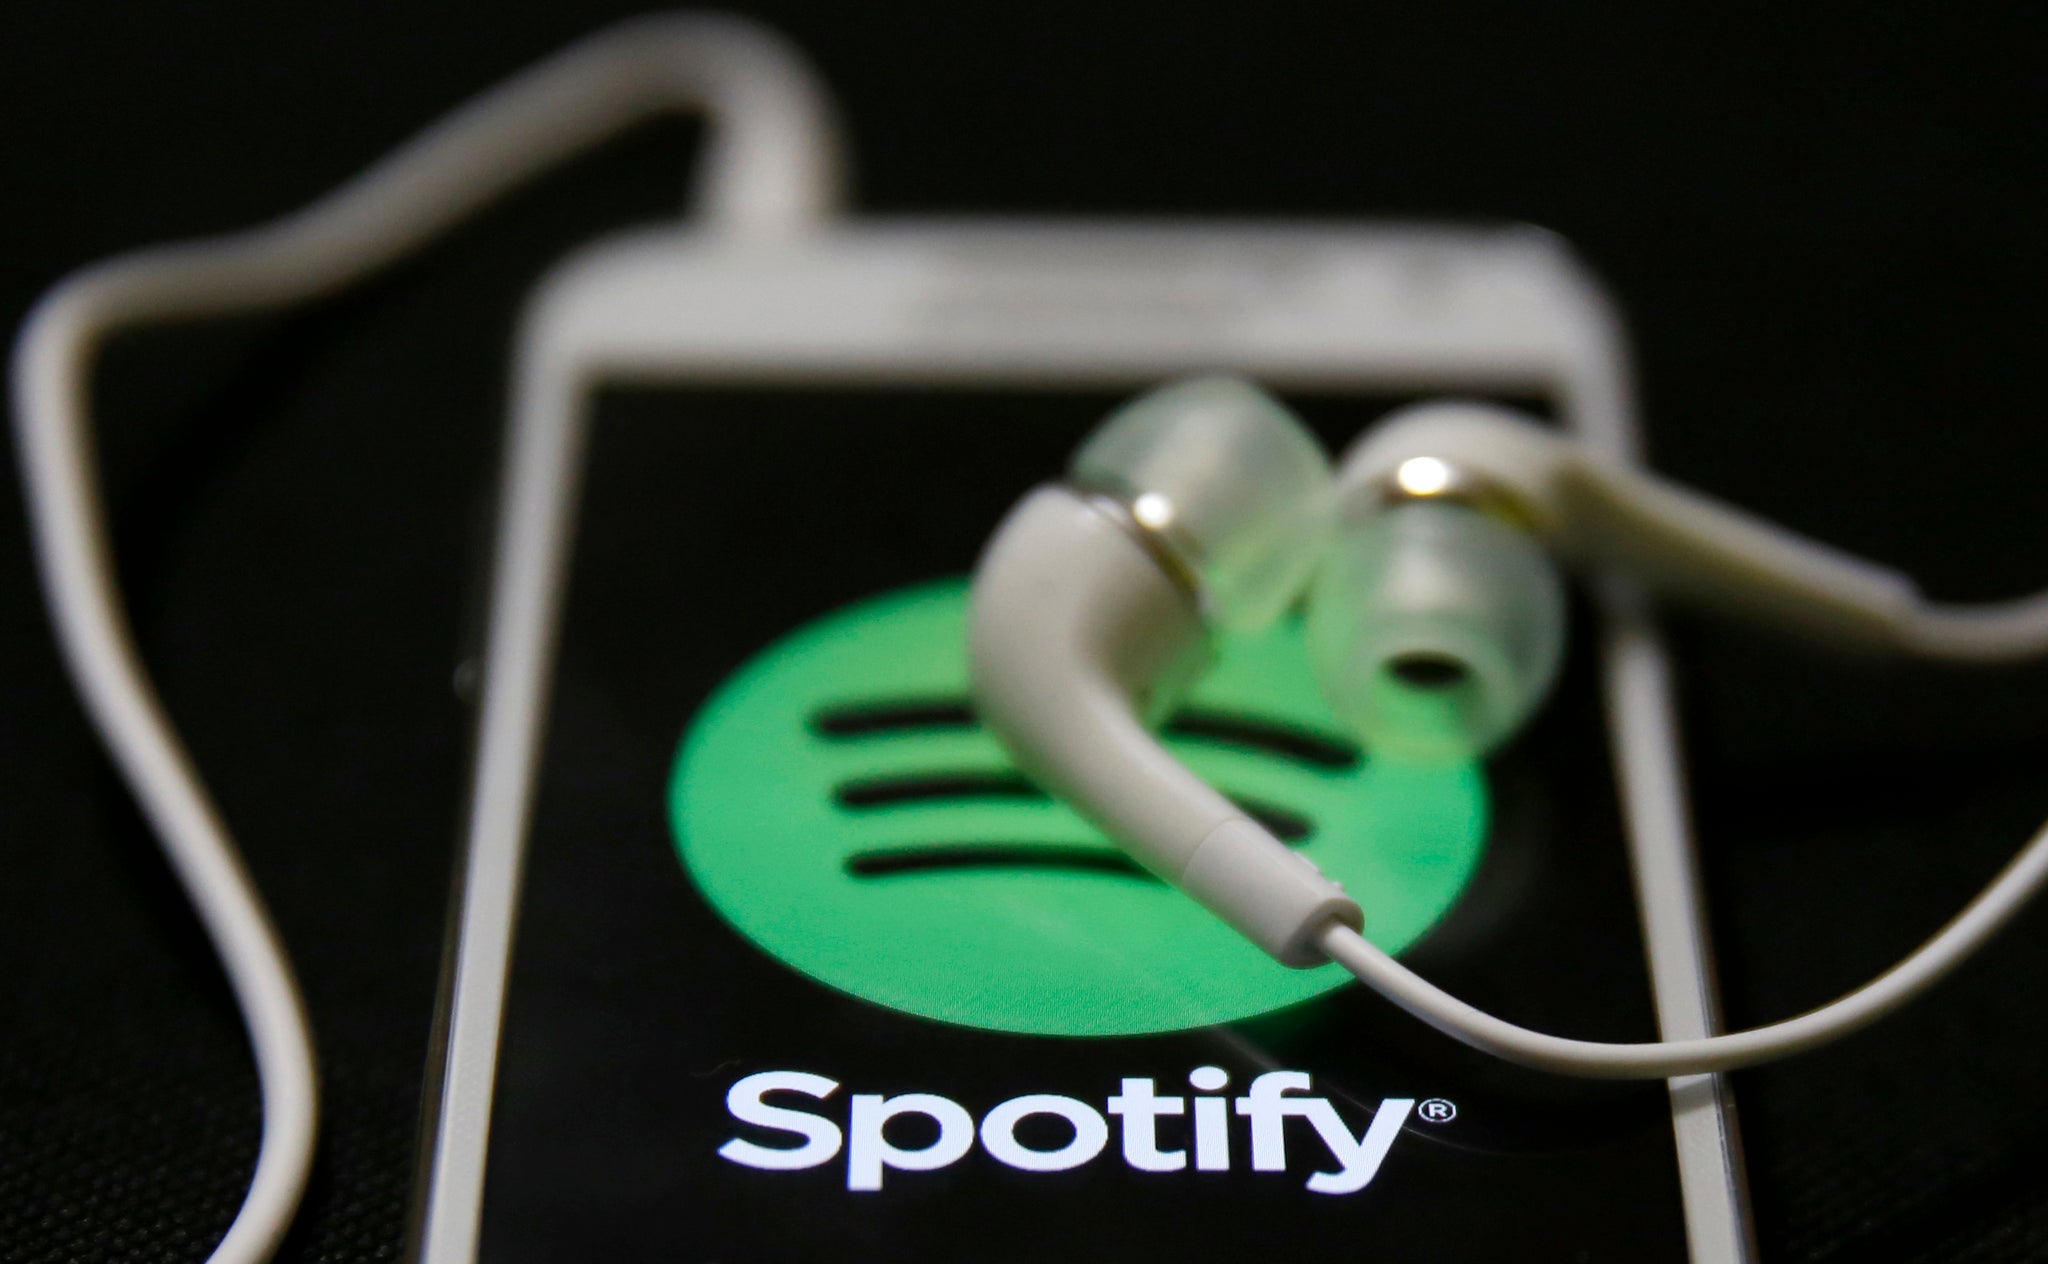 No more being kicked out of Spotify at parties